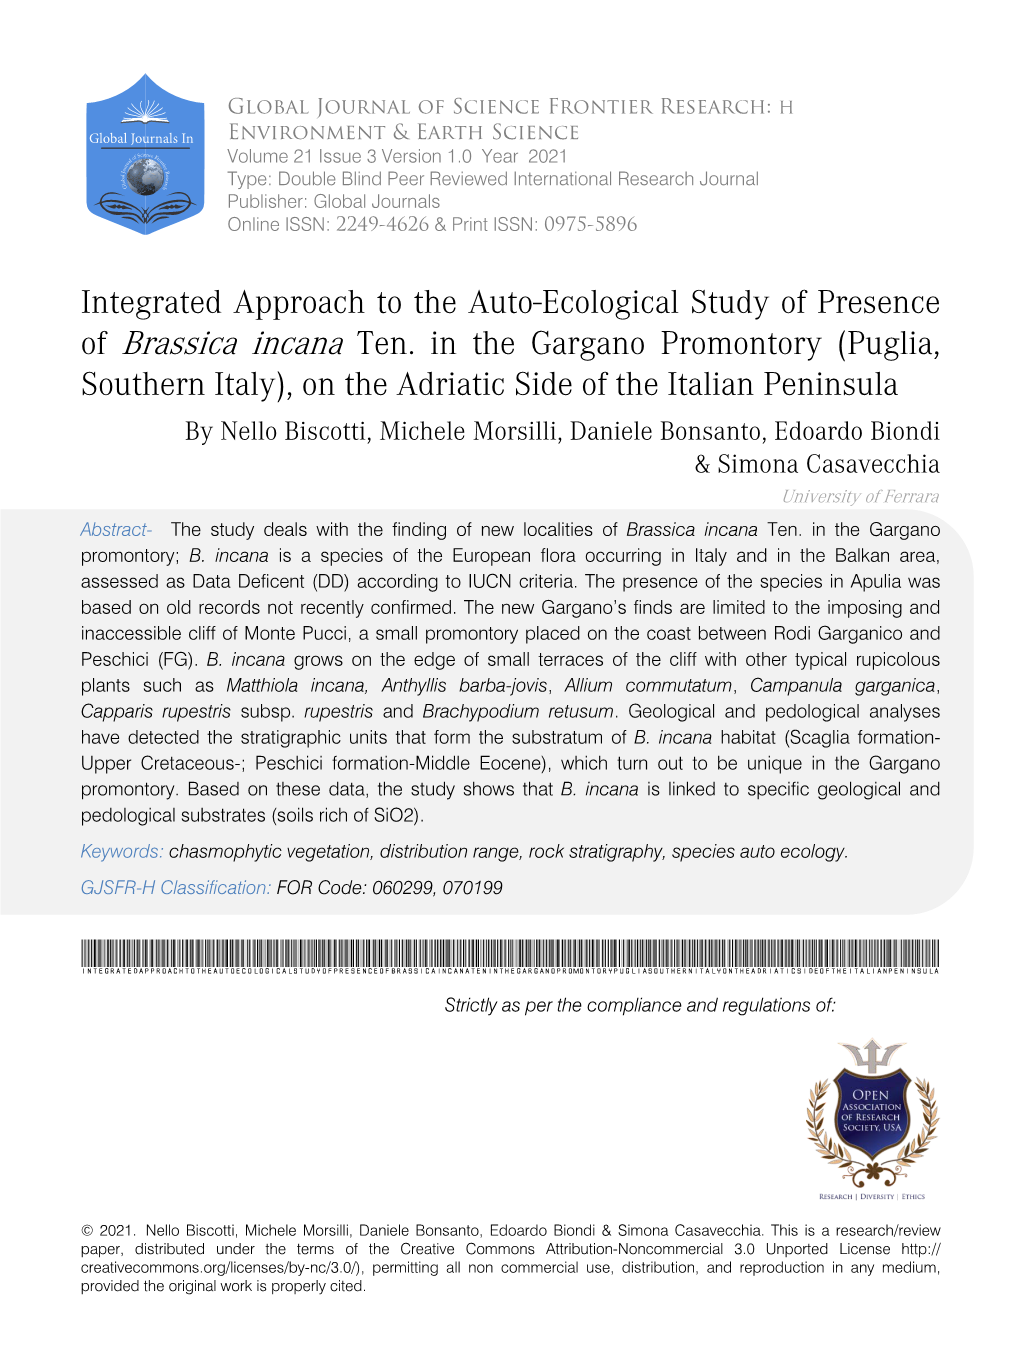 Integrated Approach to the Auto-Ecological Study of Presence of Brassica Incana Ten